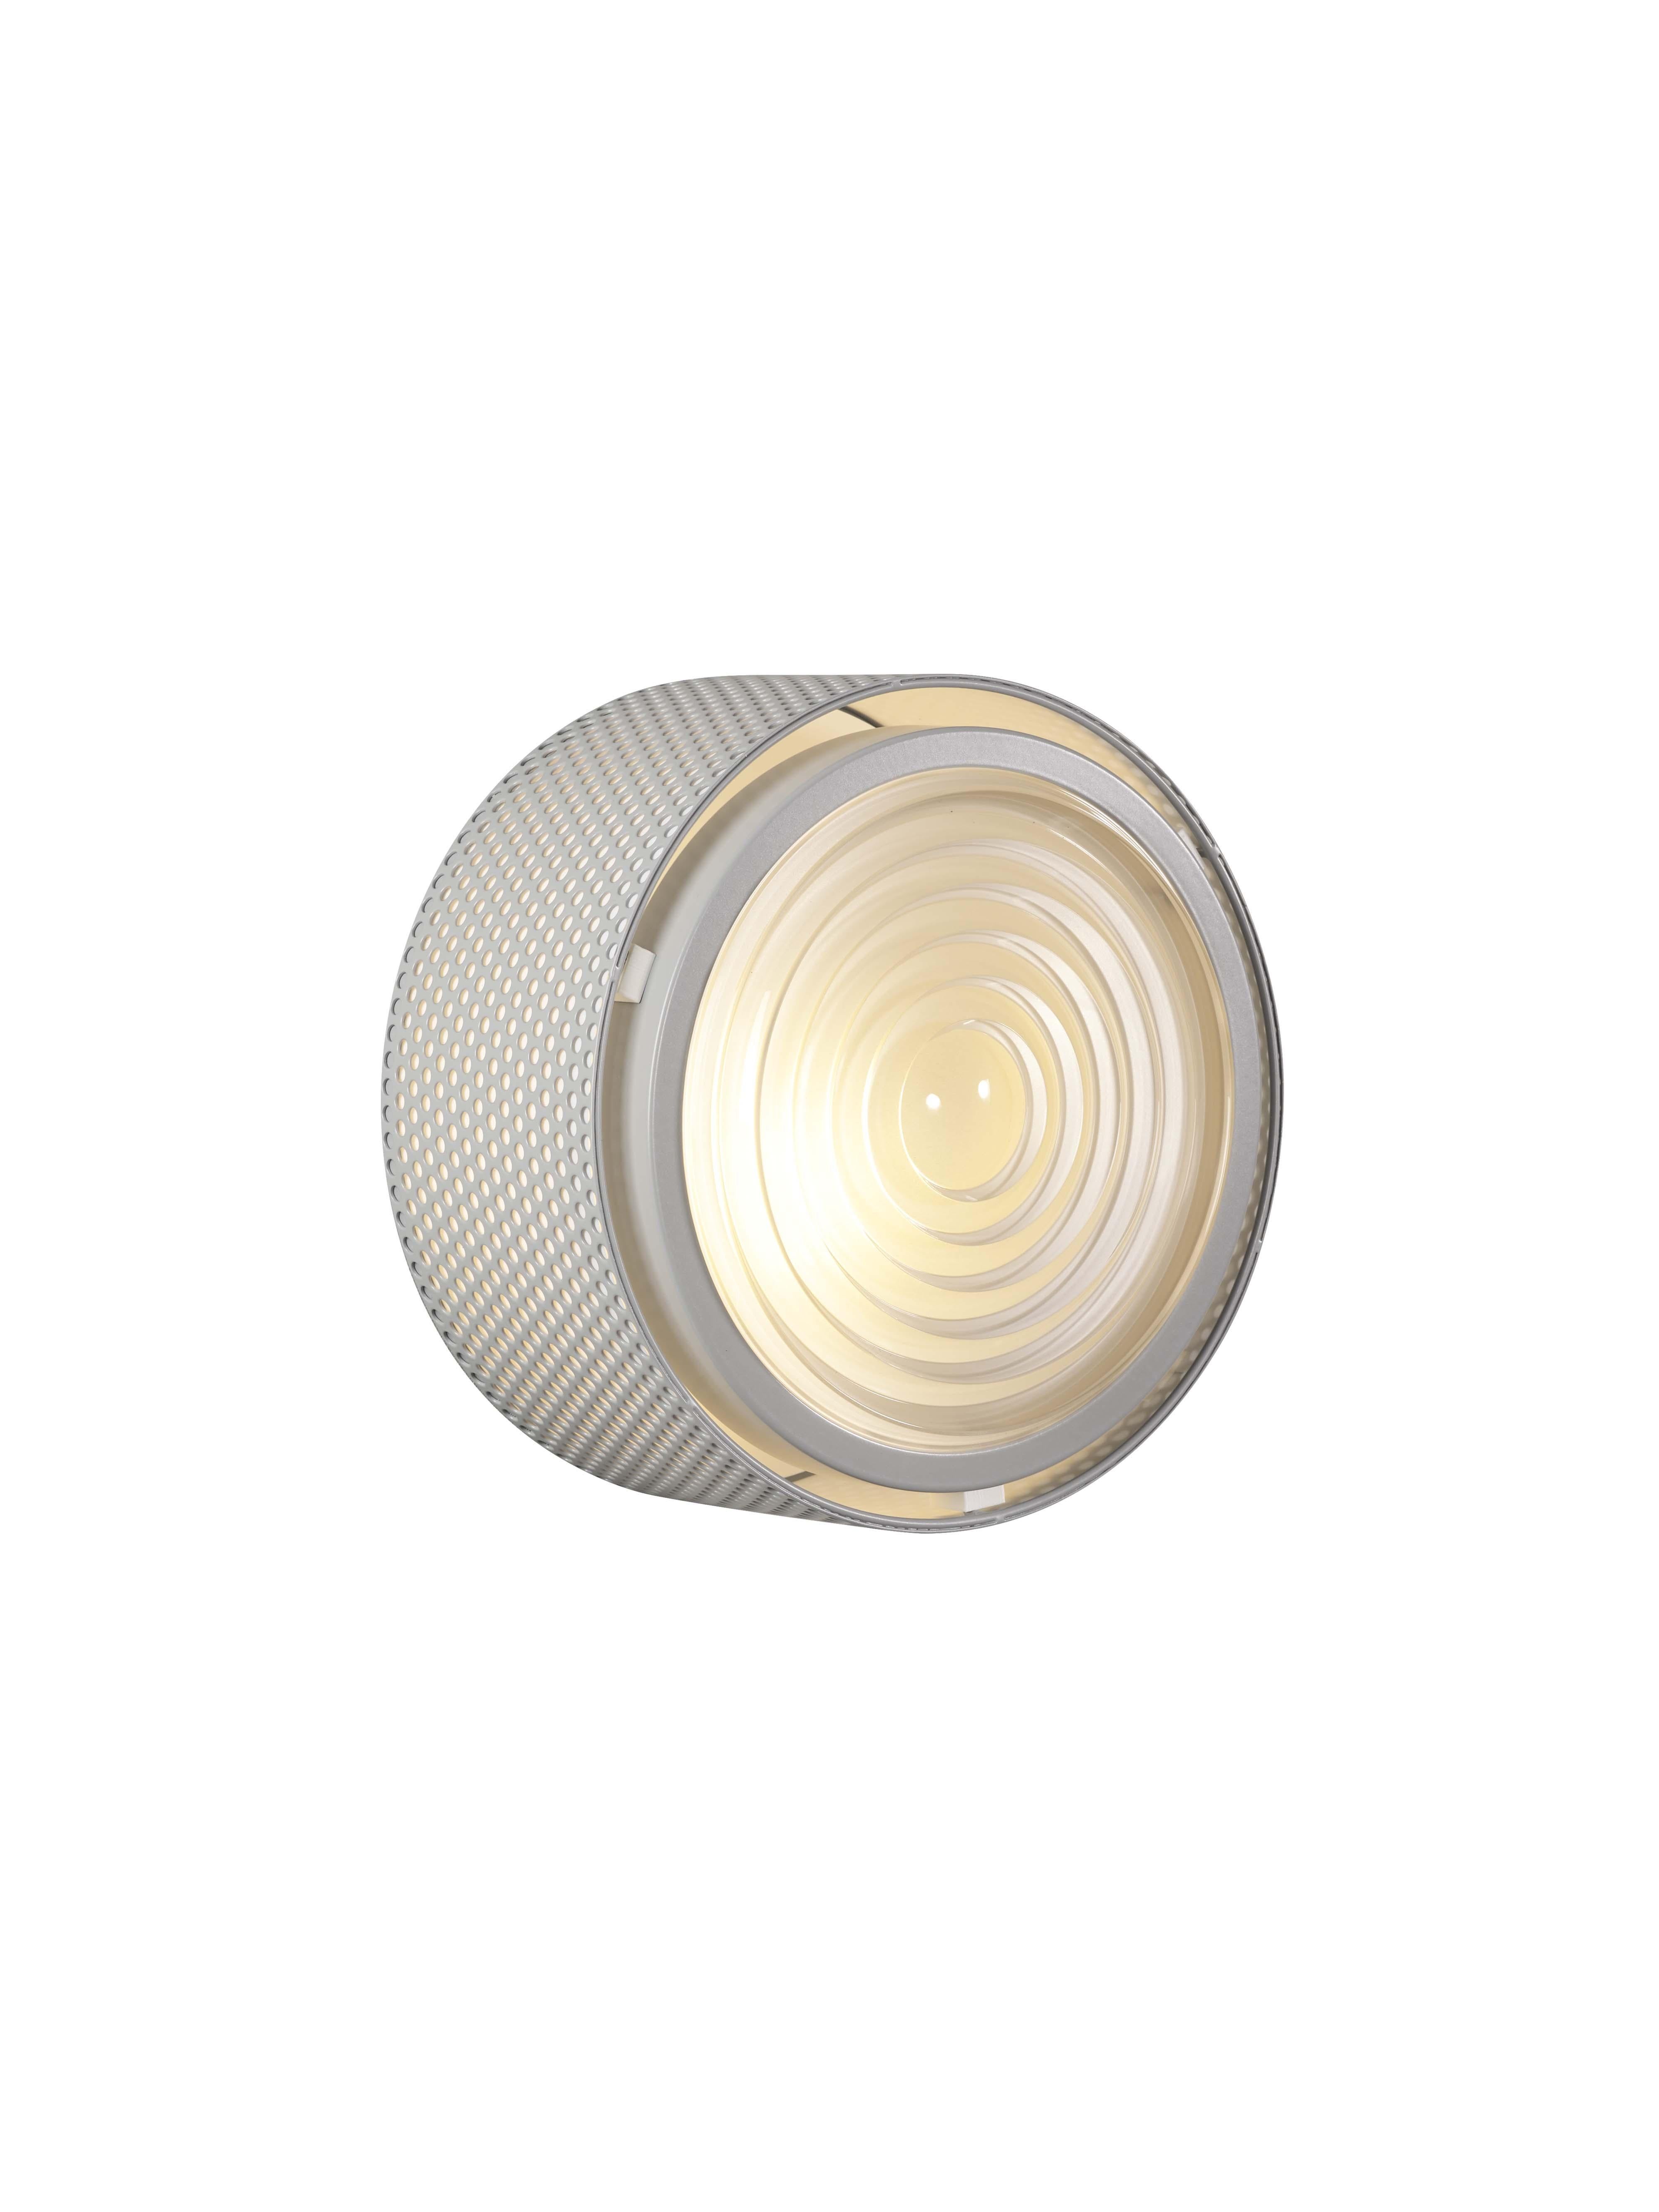 Pierre Guariche 'G13' Wall or Ceiling Light for Sammode Studio in Gray For Sale 3